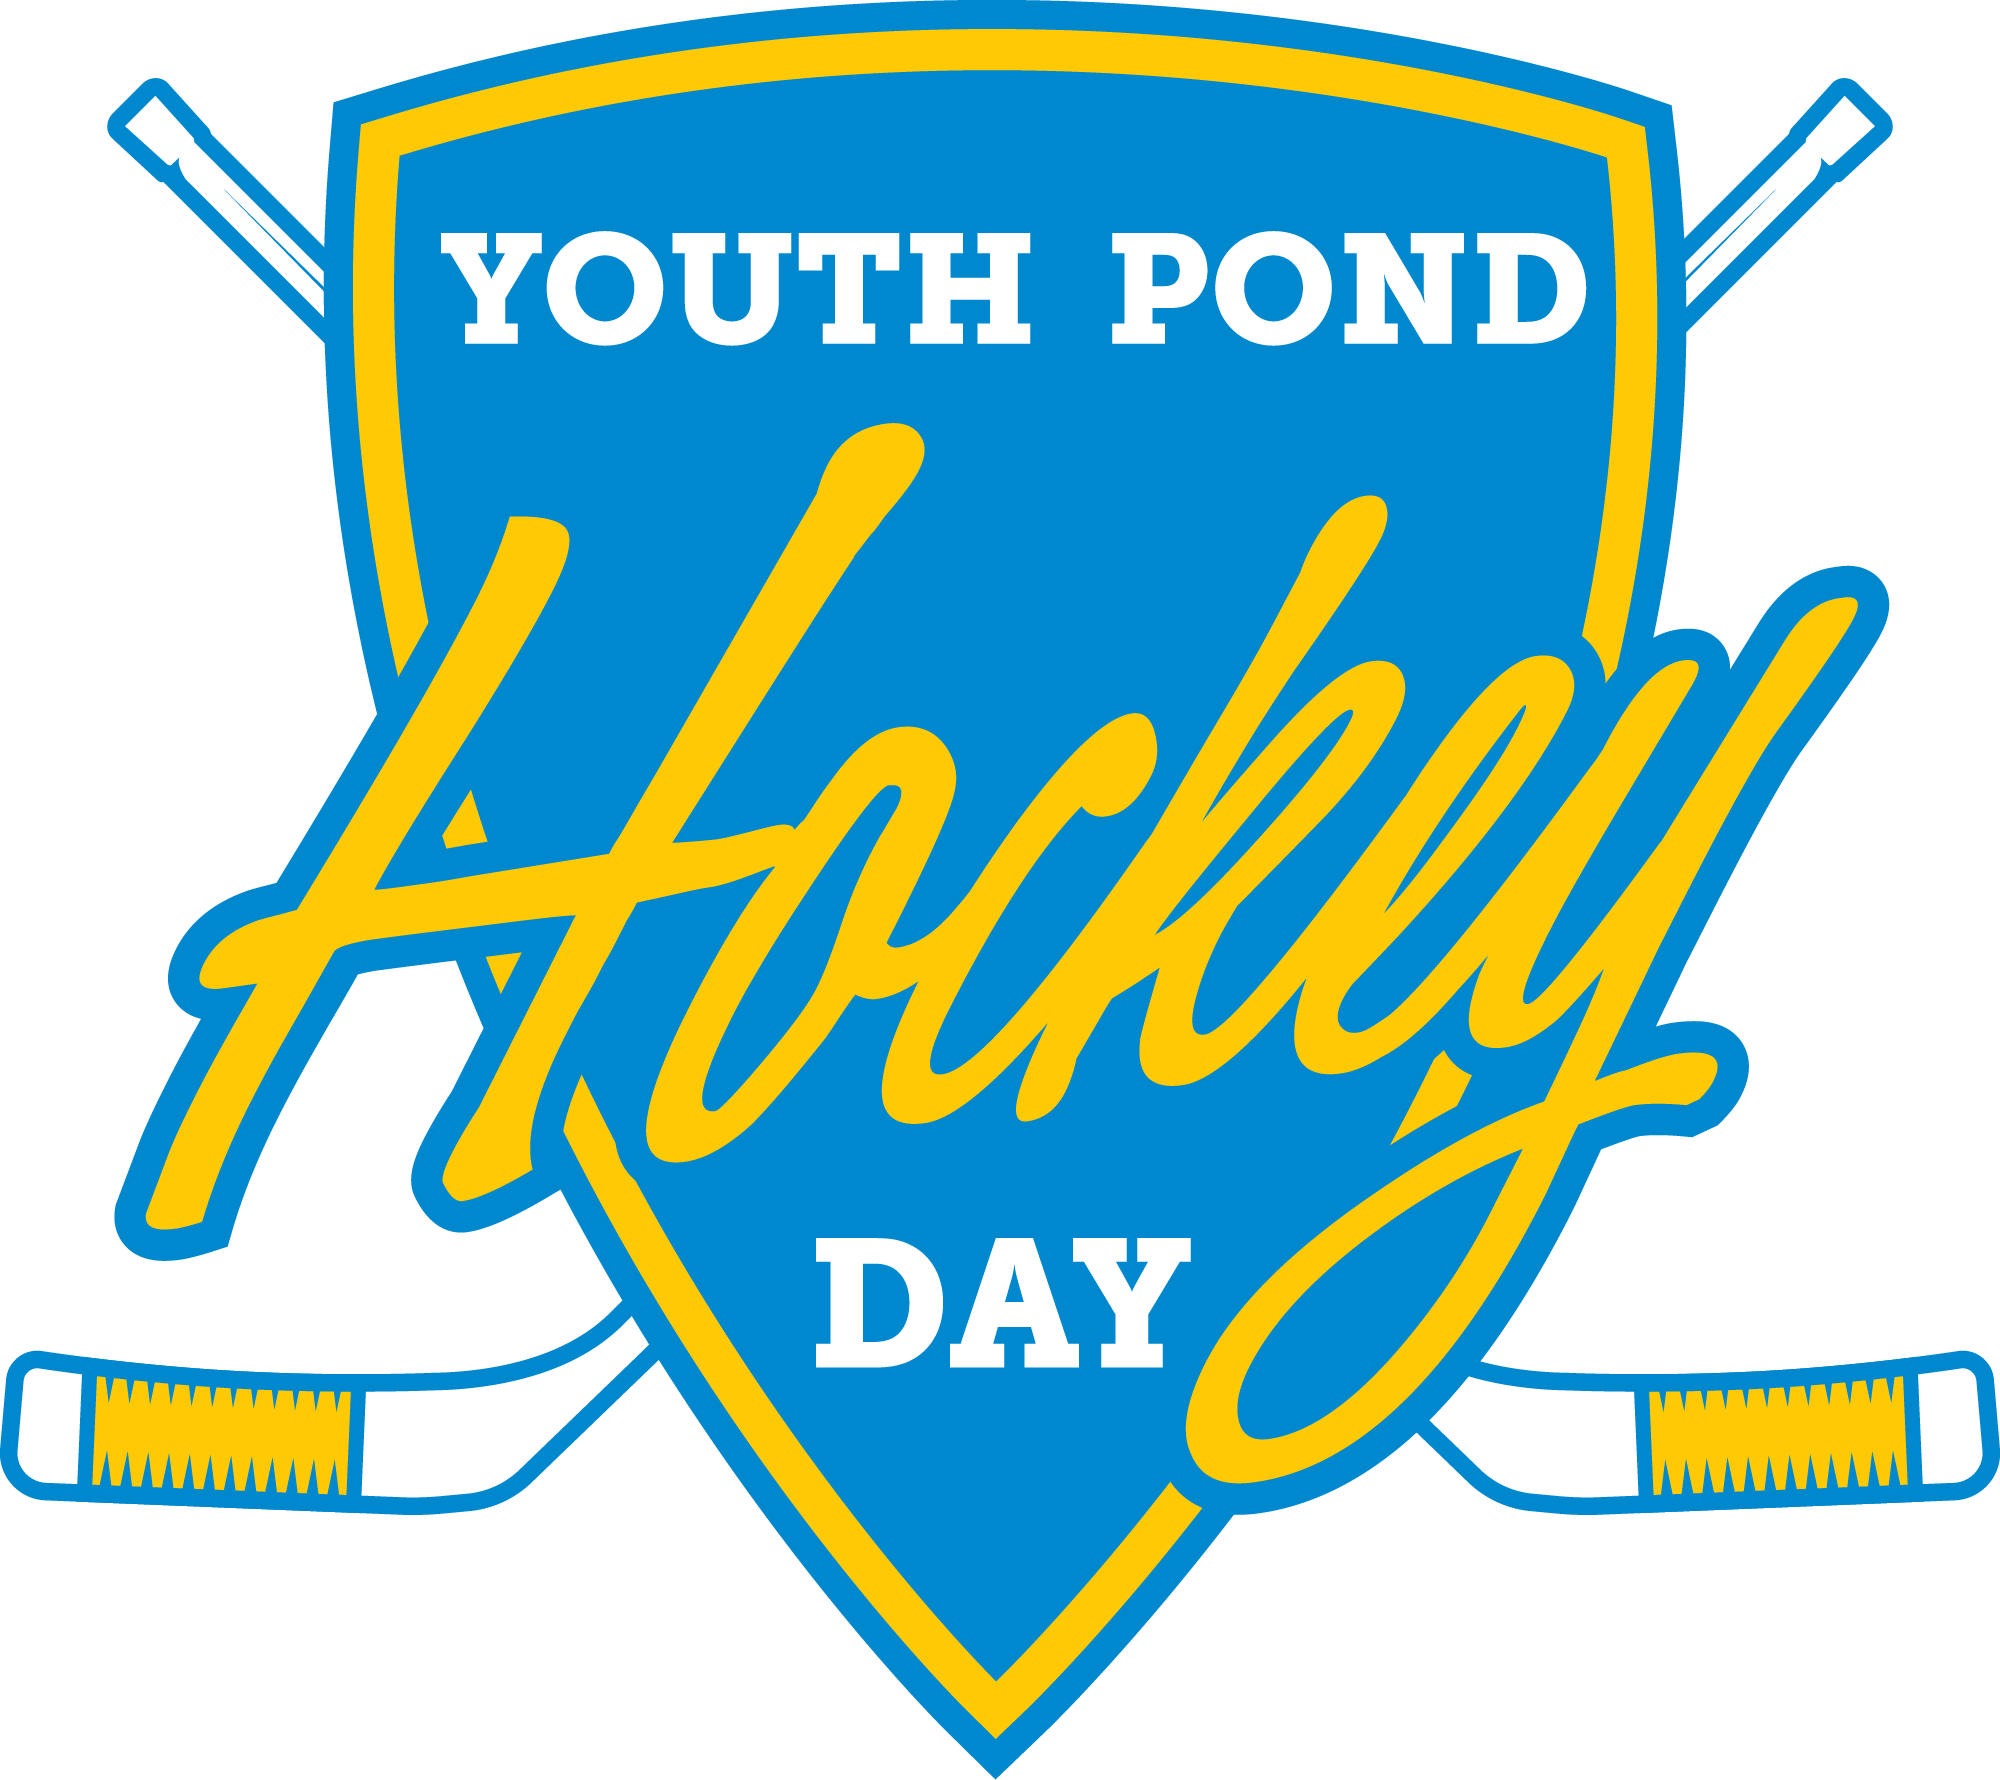 Youth Pond Hockey Day - Logo - Youth Pond in white font, Hockey in yellow script font and Day in white font, all over a blue shield that is set over two white hockey sticks with yellow tape